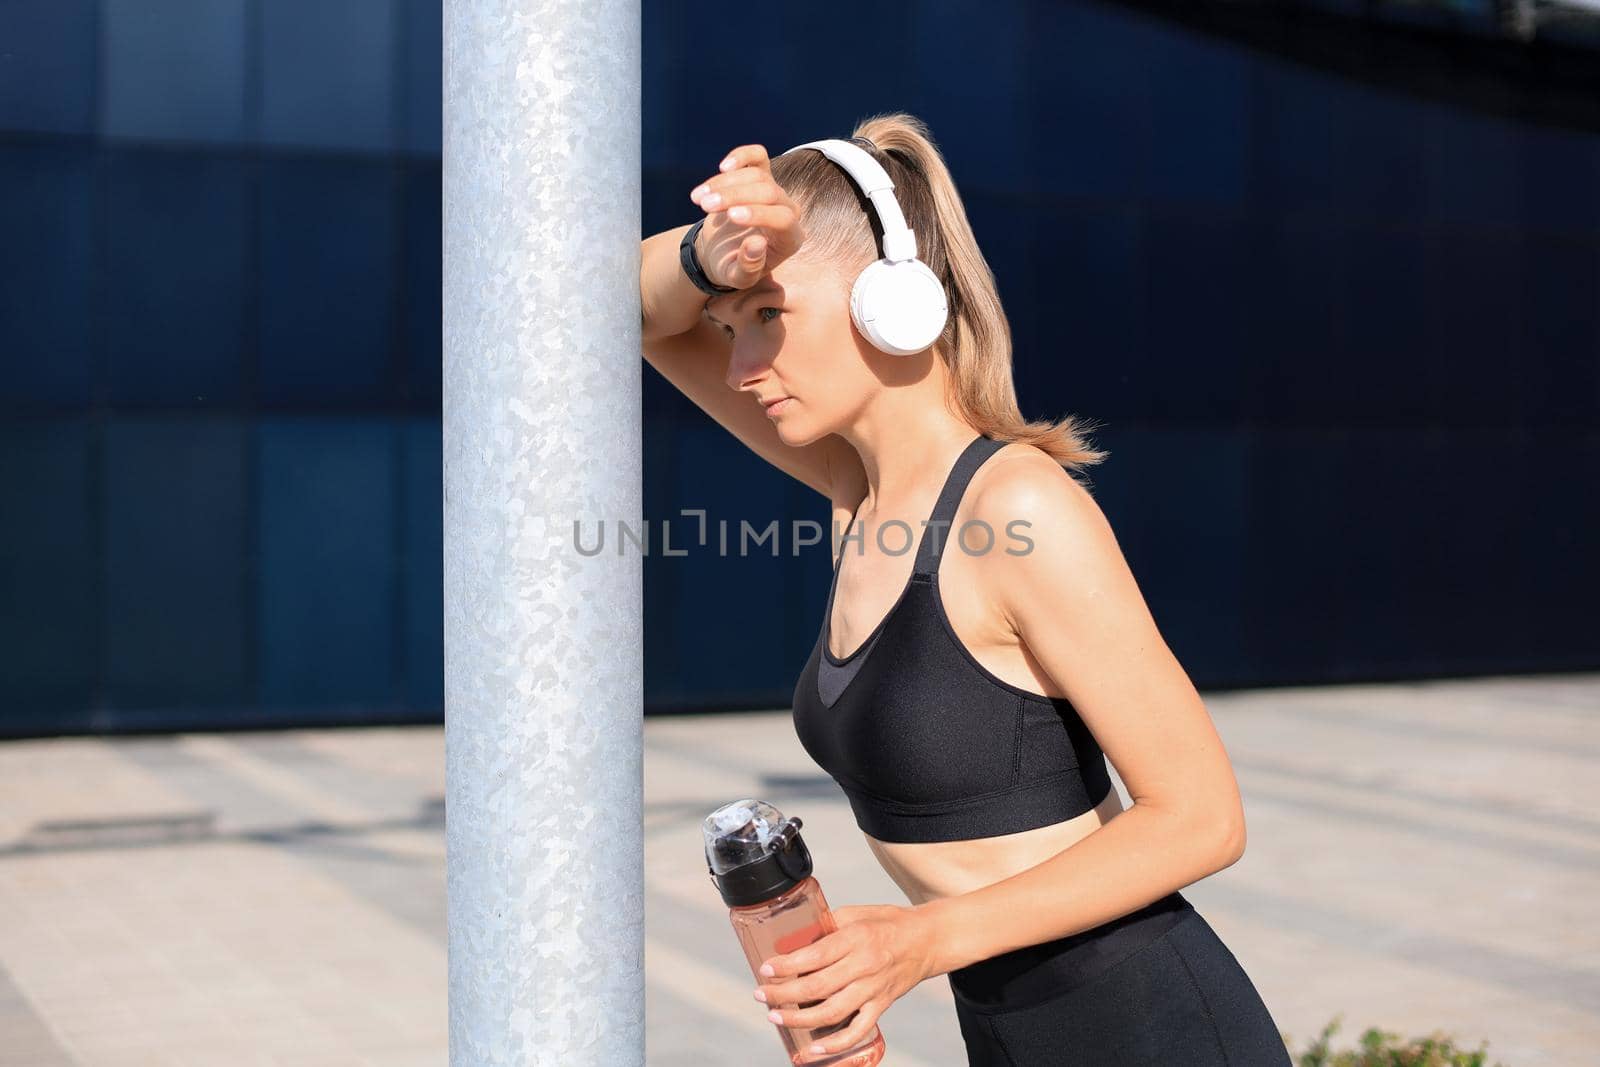 Beautiful female runner is standing outdoors holding water bottle. Fitness woman takes a break after running workout